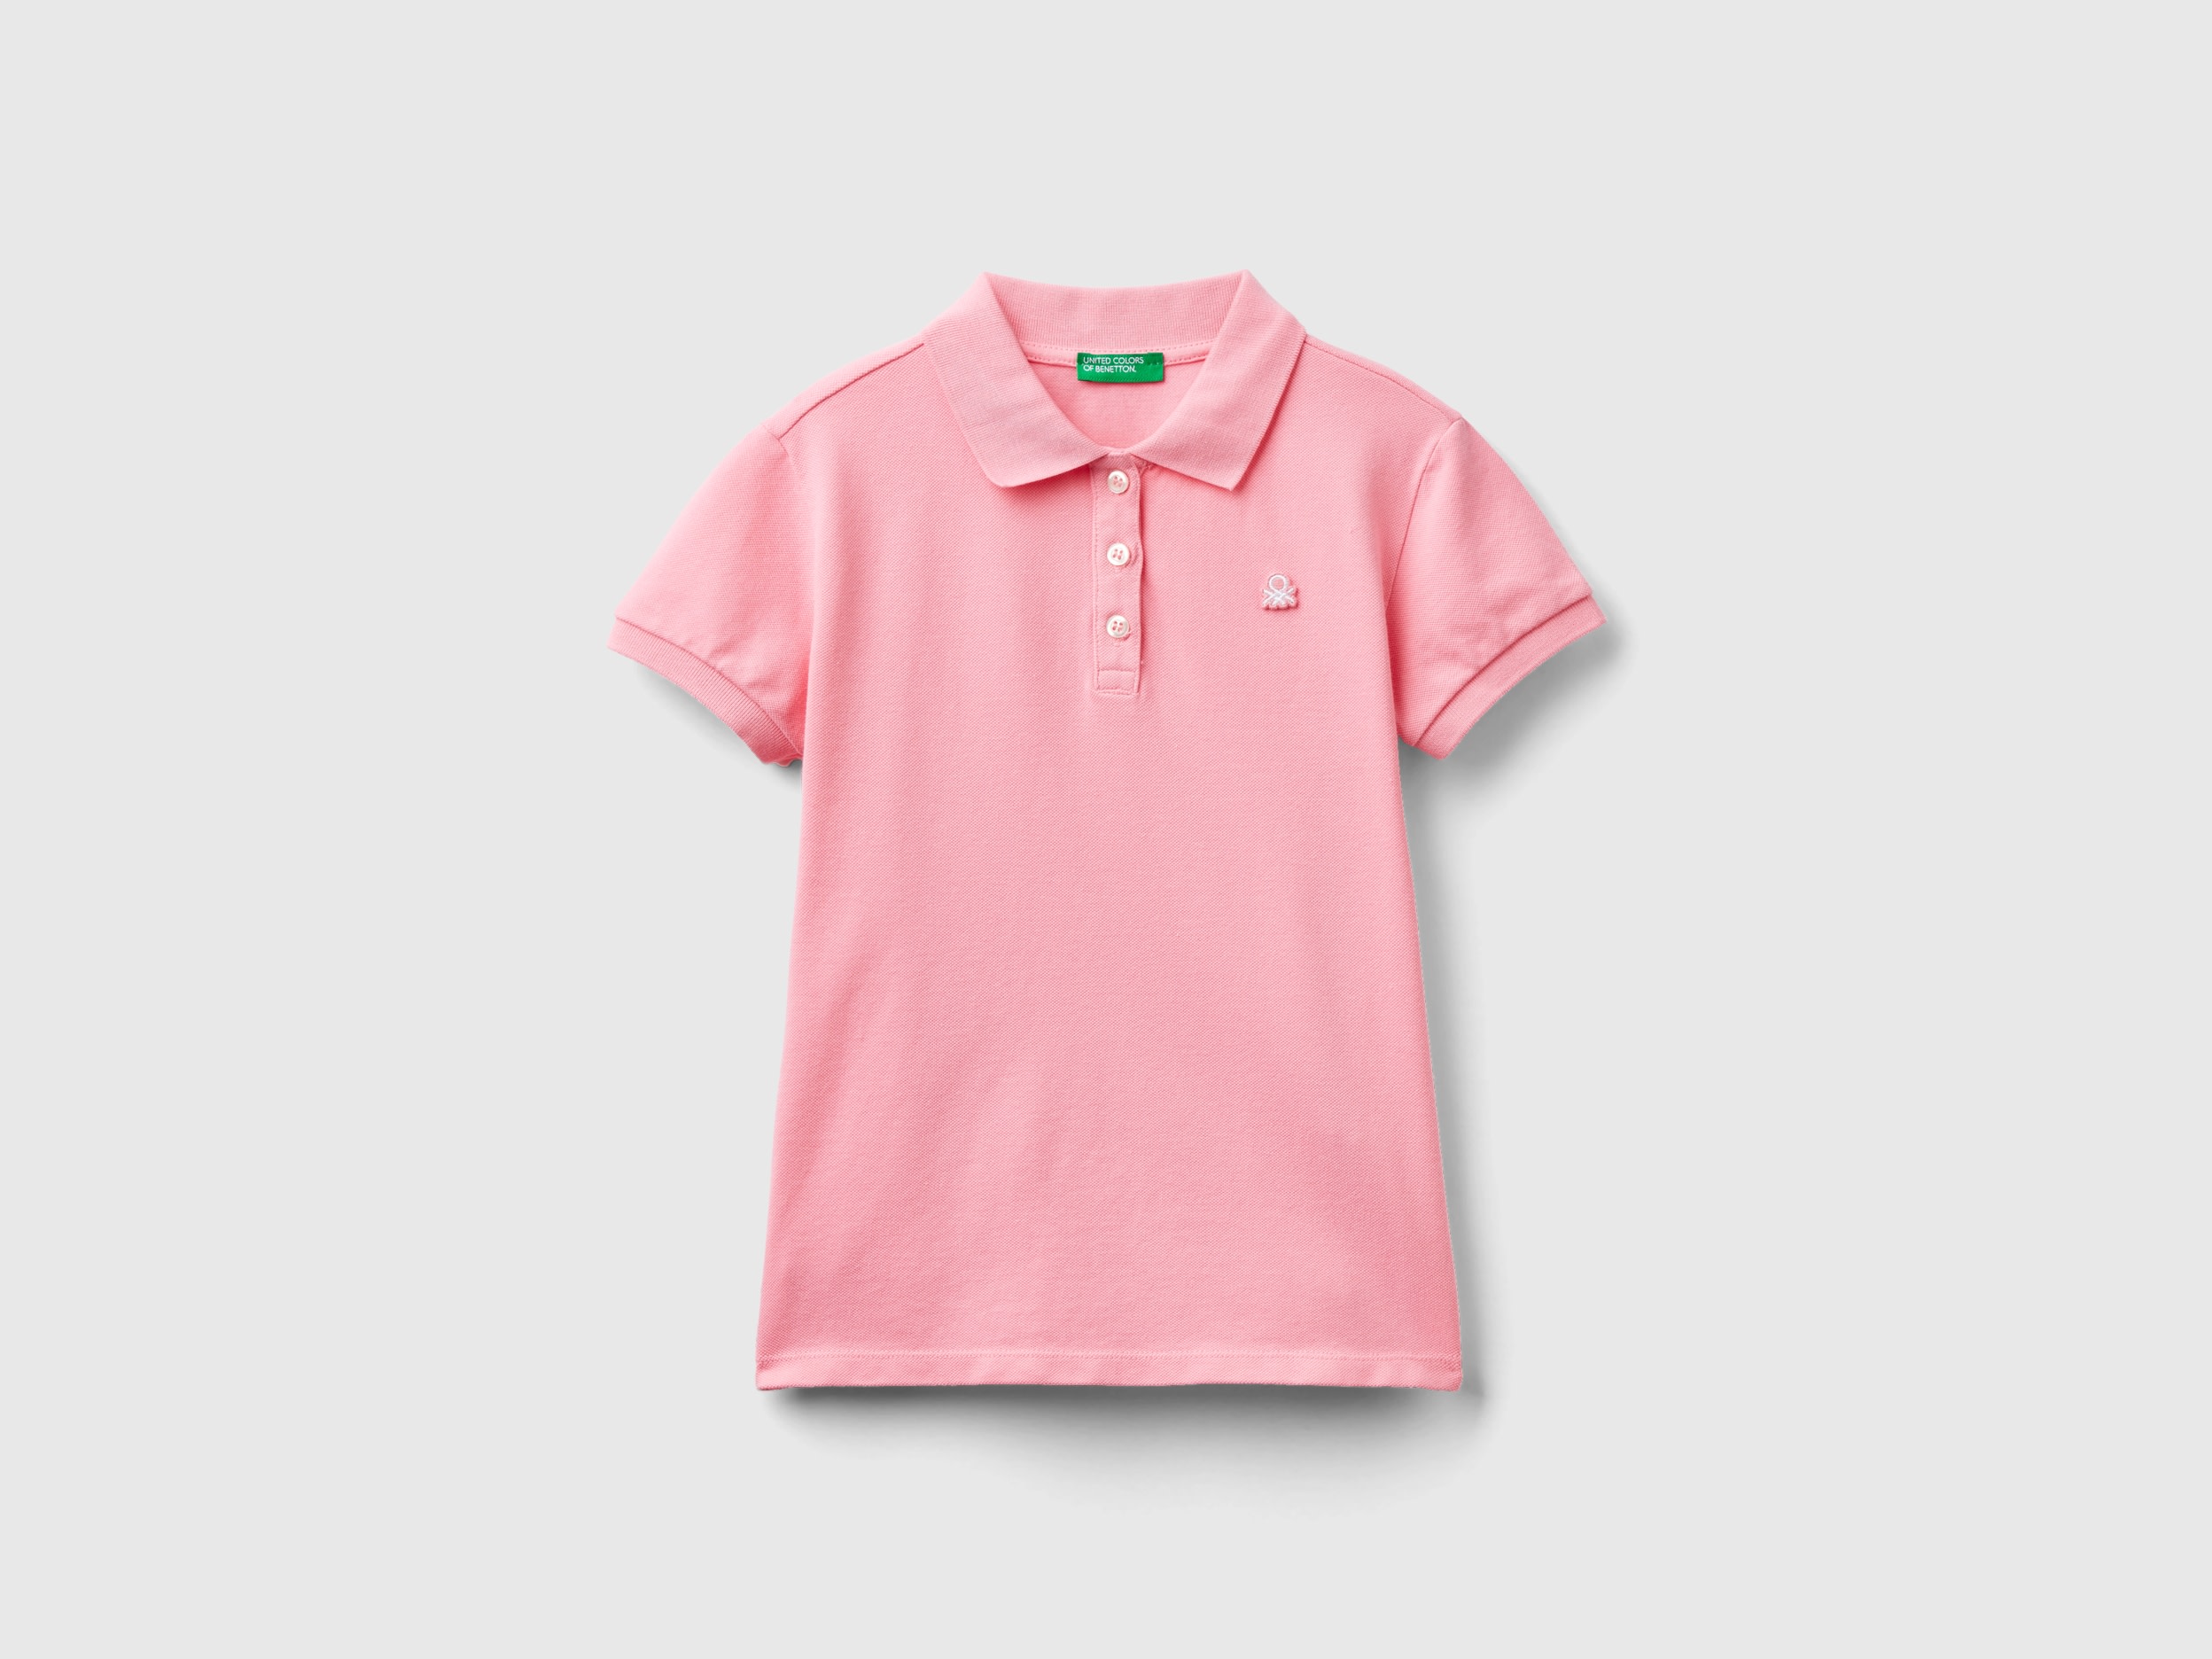 Image of Benetton, Short Sleeve Polo In Organic Cotton, size L, Pink, Kids